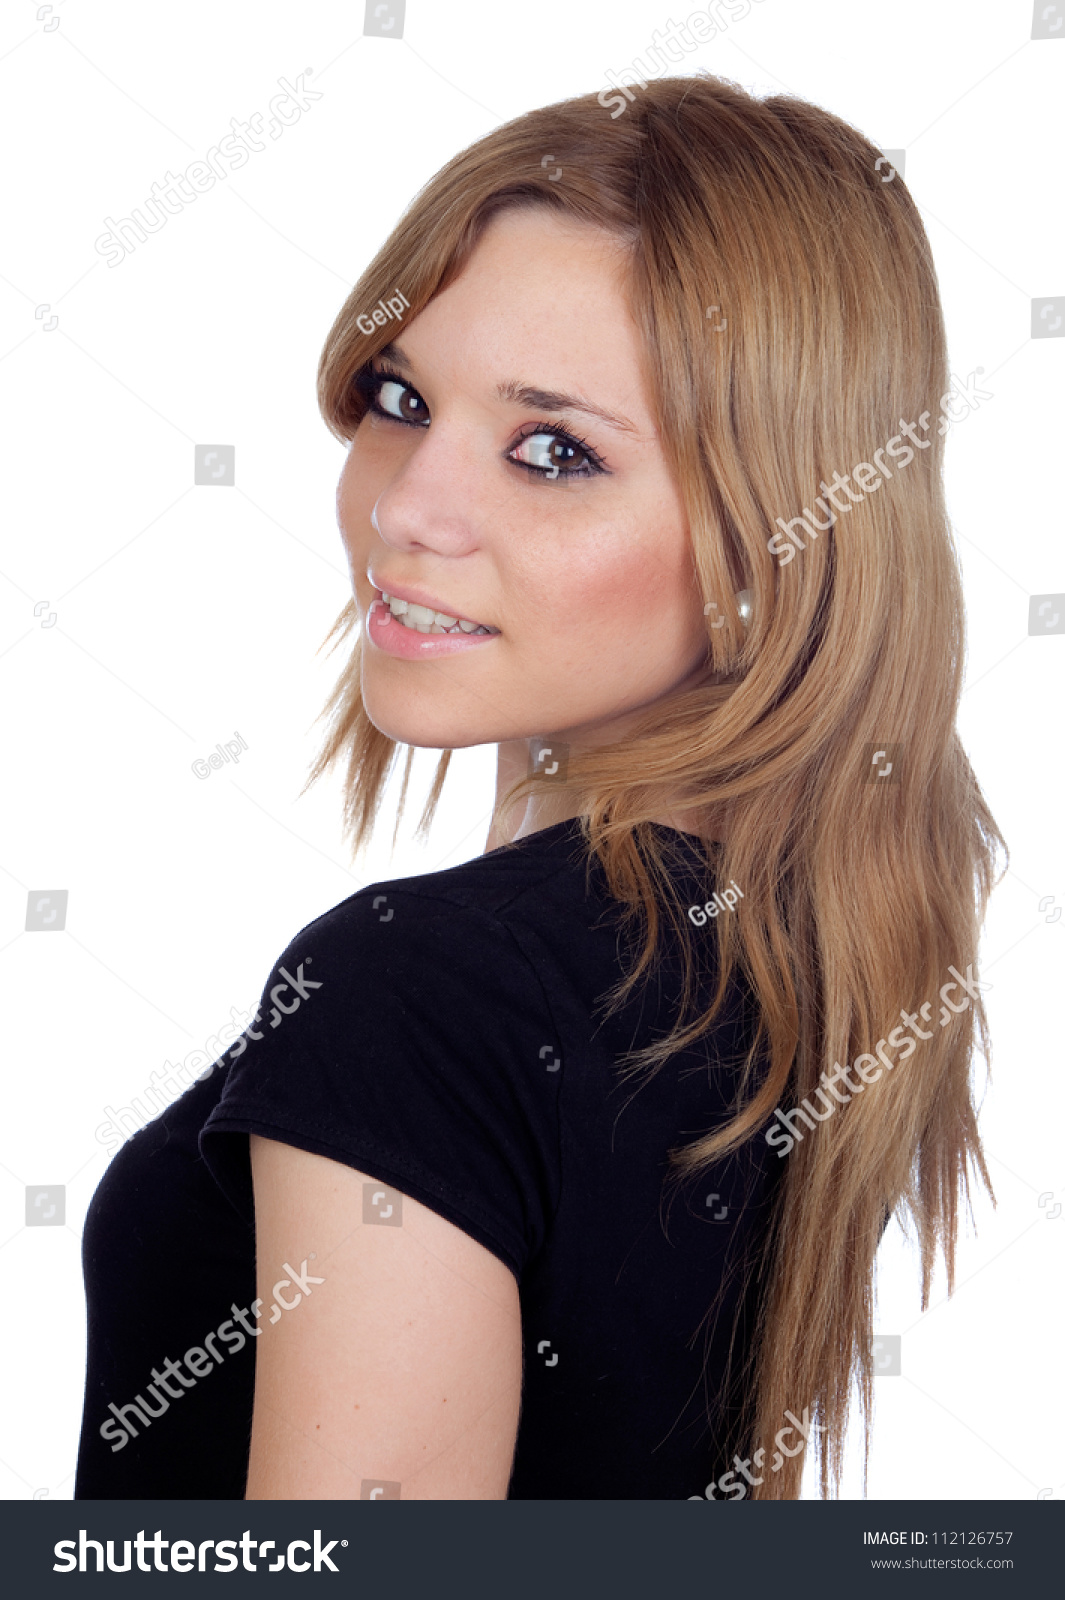 Teen Rebellious Girl Isolated On A Over White Background Stock Photo ...